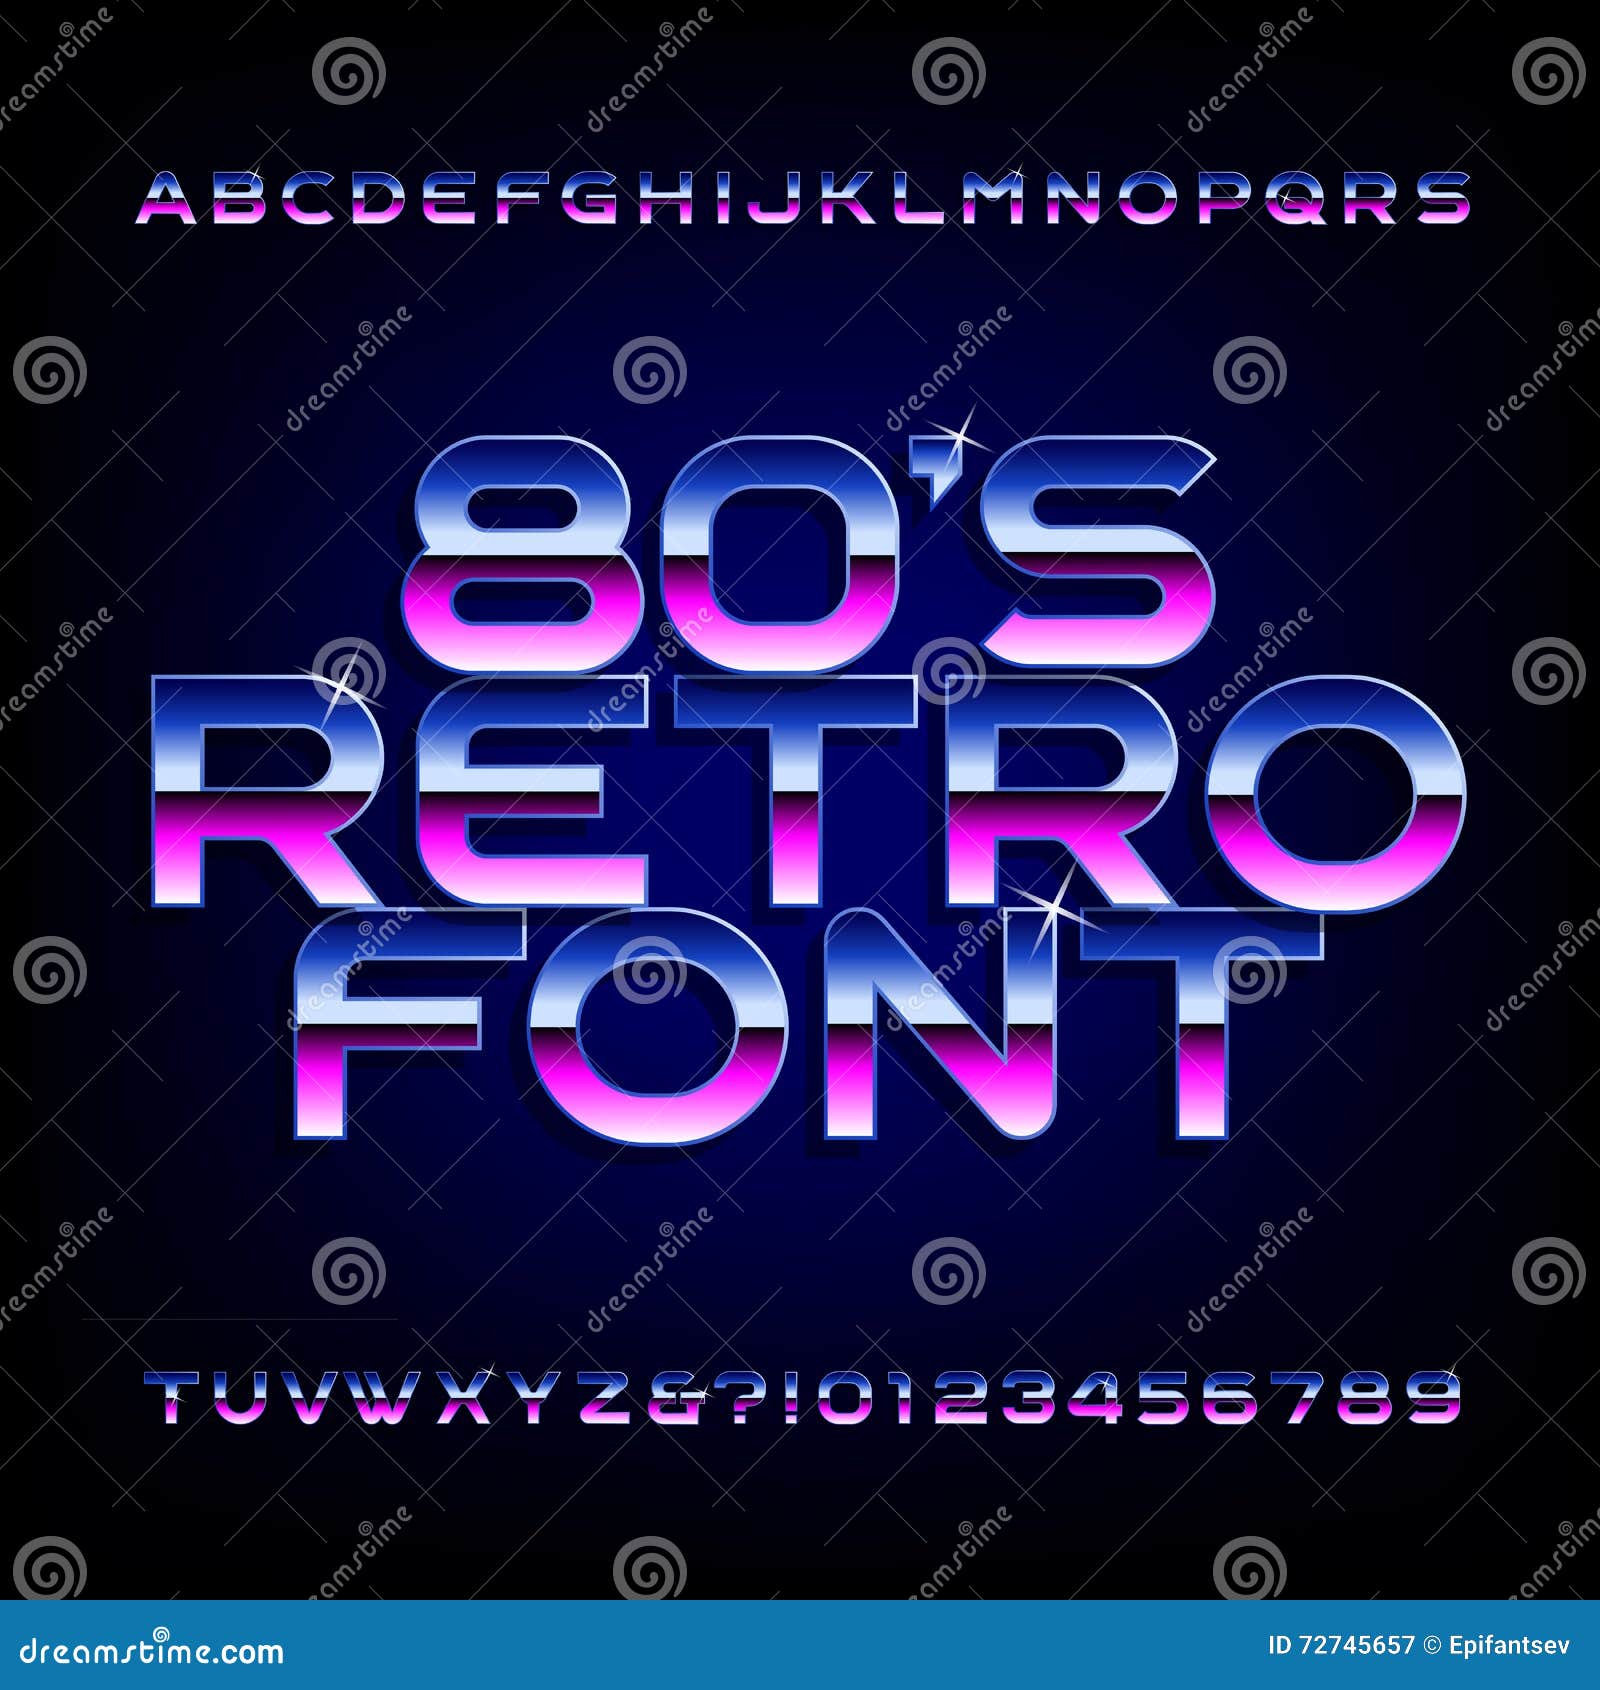 80's retro alphabet font. metallic effect shiny letters and numbers.